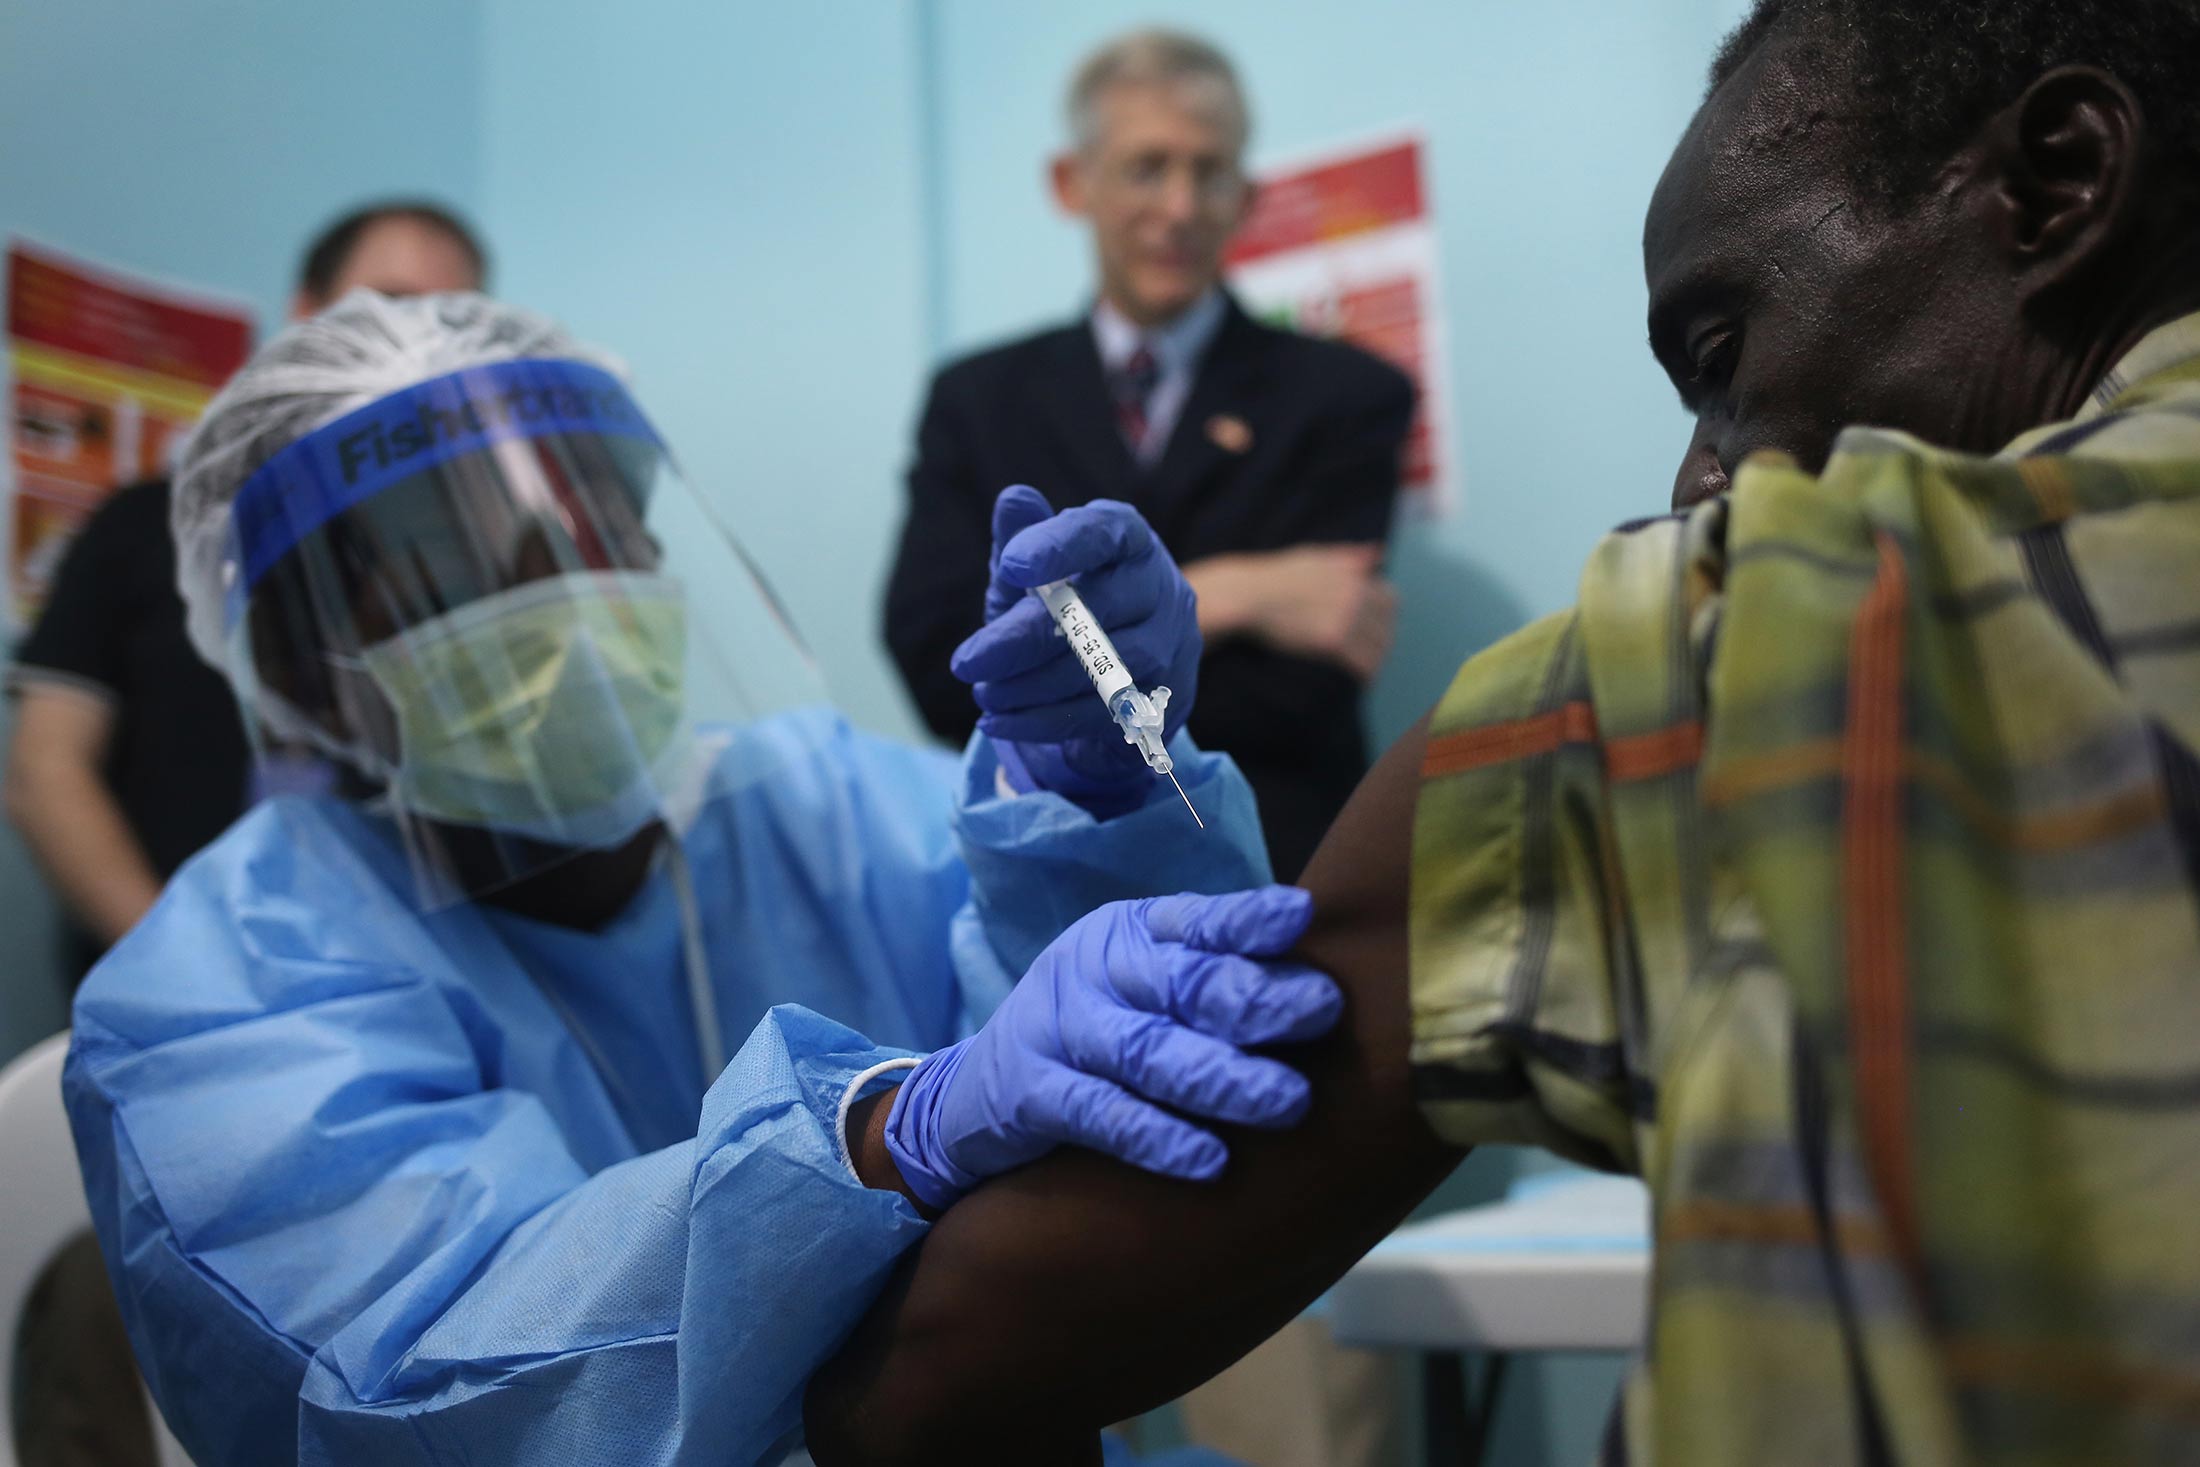 A nurse administers an injection on the first day of the Ebola vaccine study being conducted at Redemption Hospital, formerly an Ebola holding center, on Feb. 2, 2015 in Monrovia, Liberia. Twelve people were given injections, out of a planned 27,000 people in the Monrovia area. The clinical research study is being conducted jointly by the U.S. National Institutes of Health (NIH), and the Liberian Ministry of Health.
